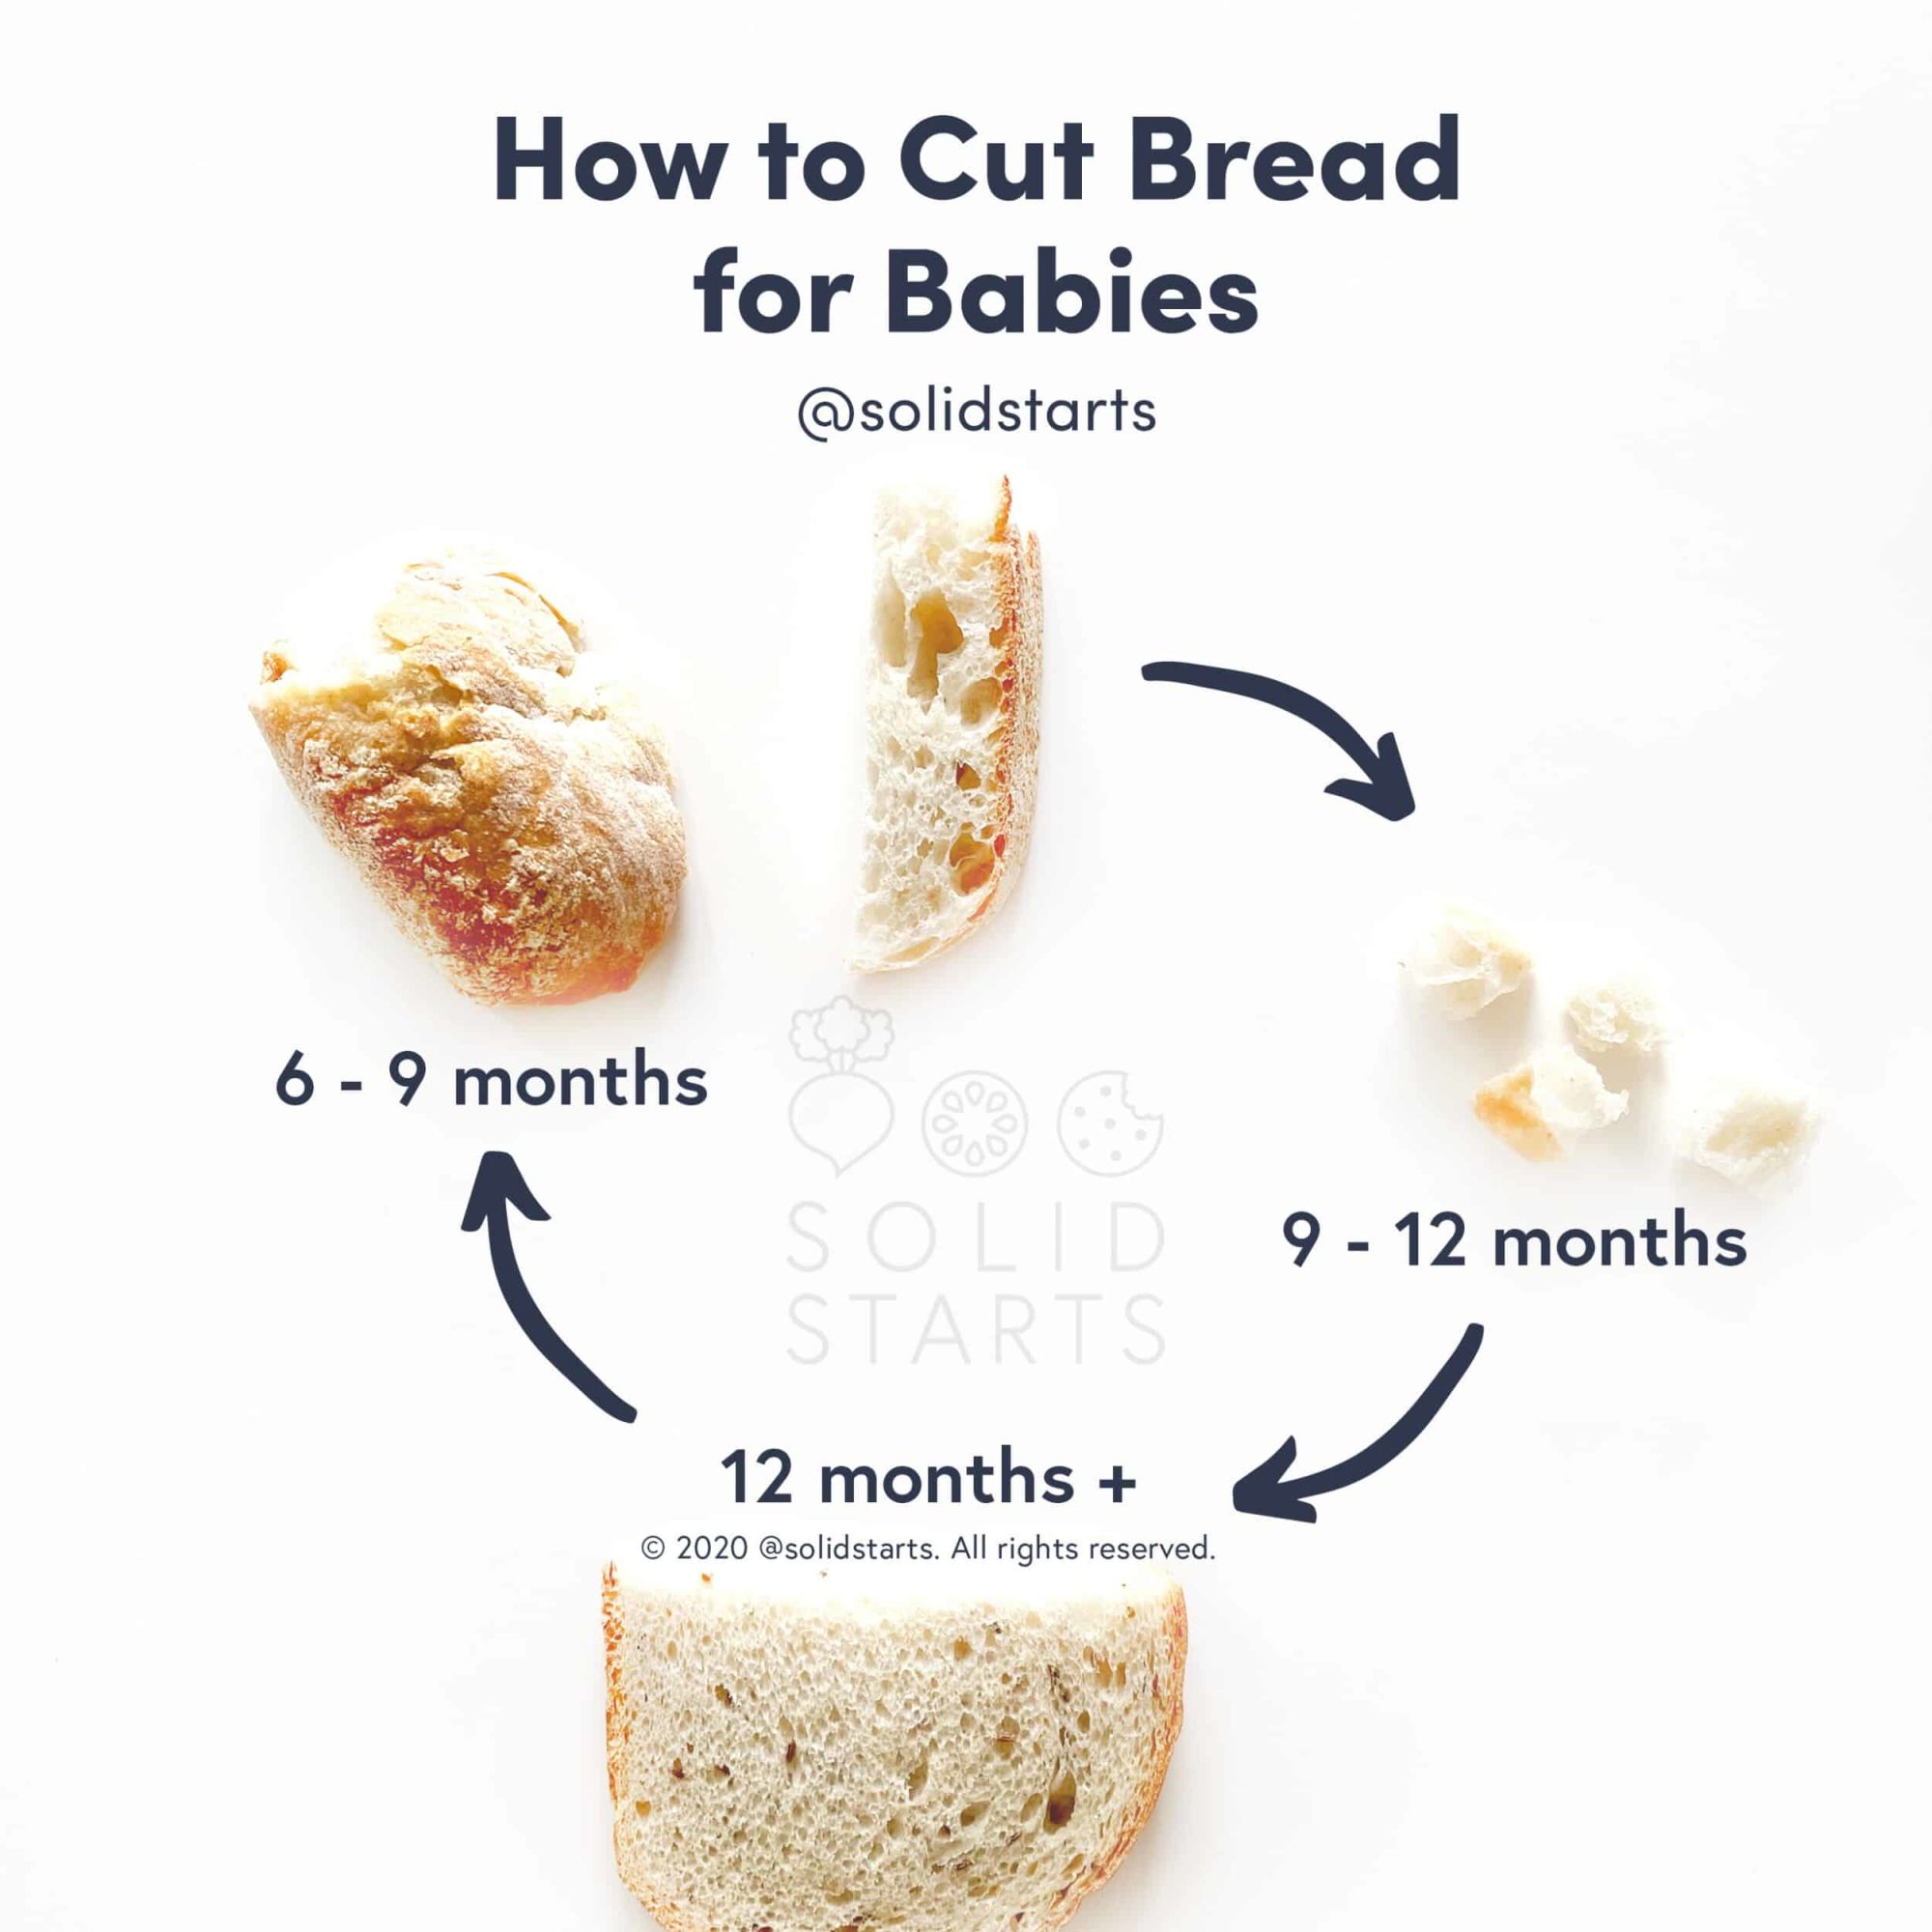 How to Cut Bread for Babies